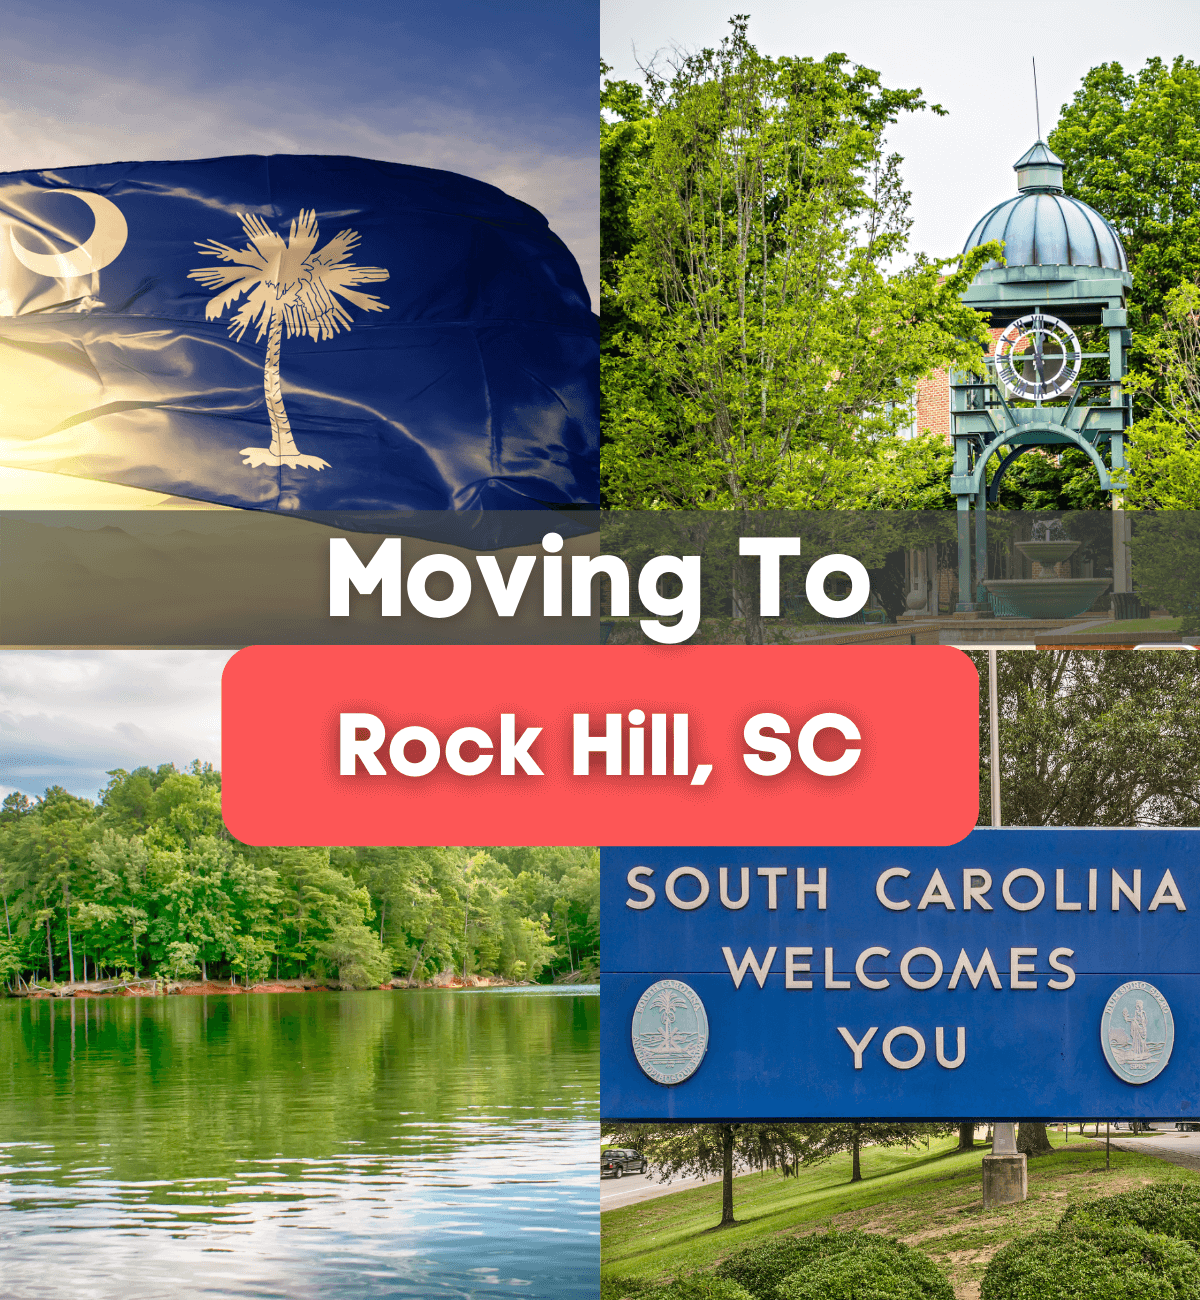 Moving to Rock Hill, SC - What is it like living in Rock Hill, South Carolina